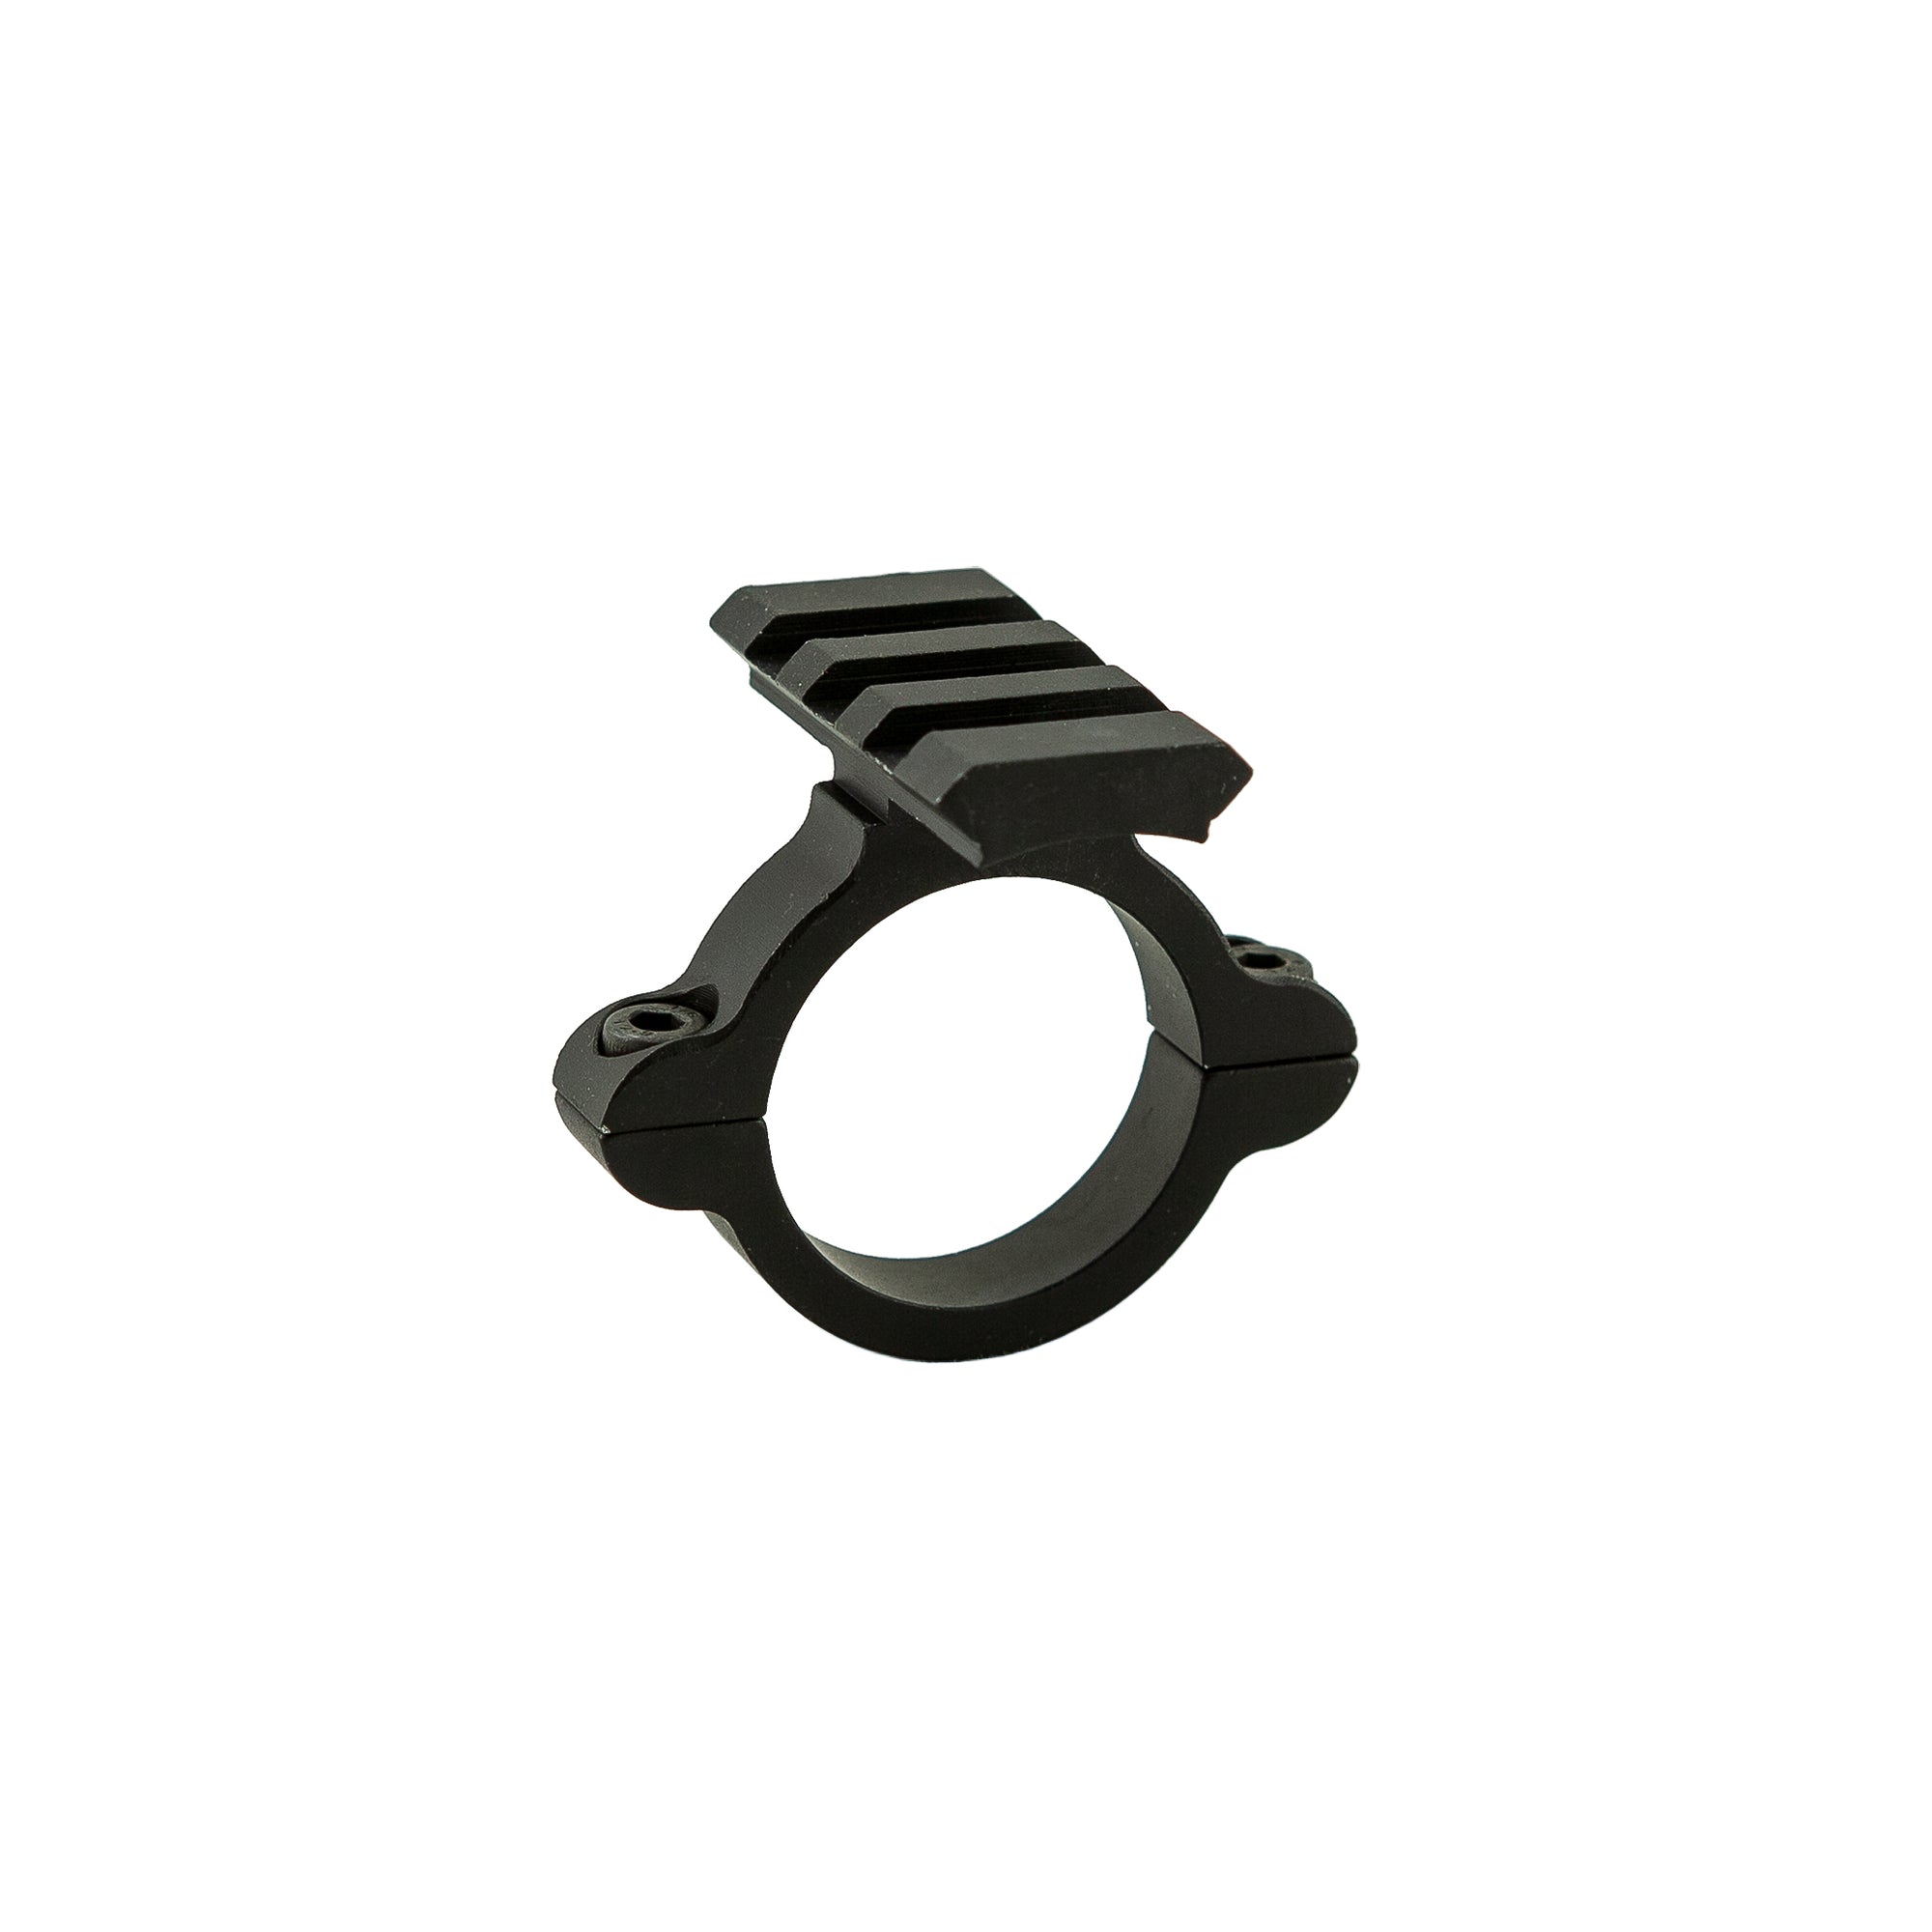 Hi-Lux 30mm Lock Ring with Rail